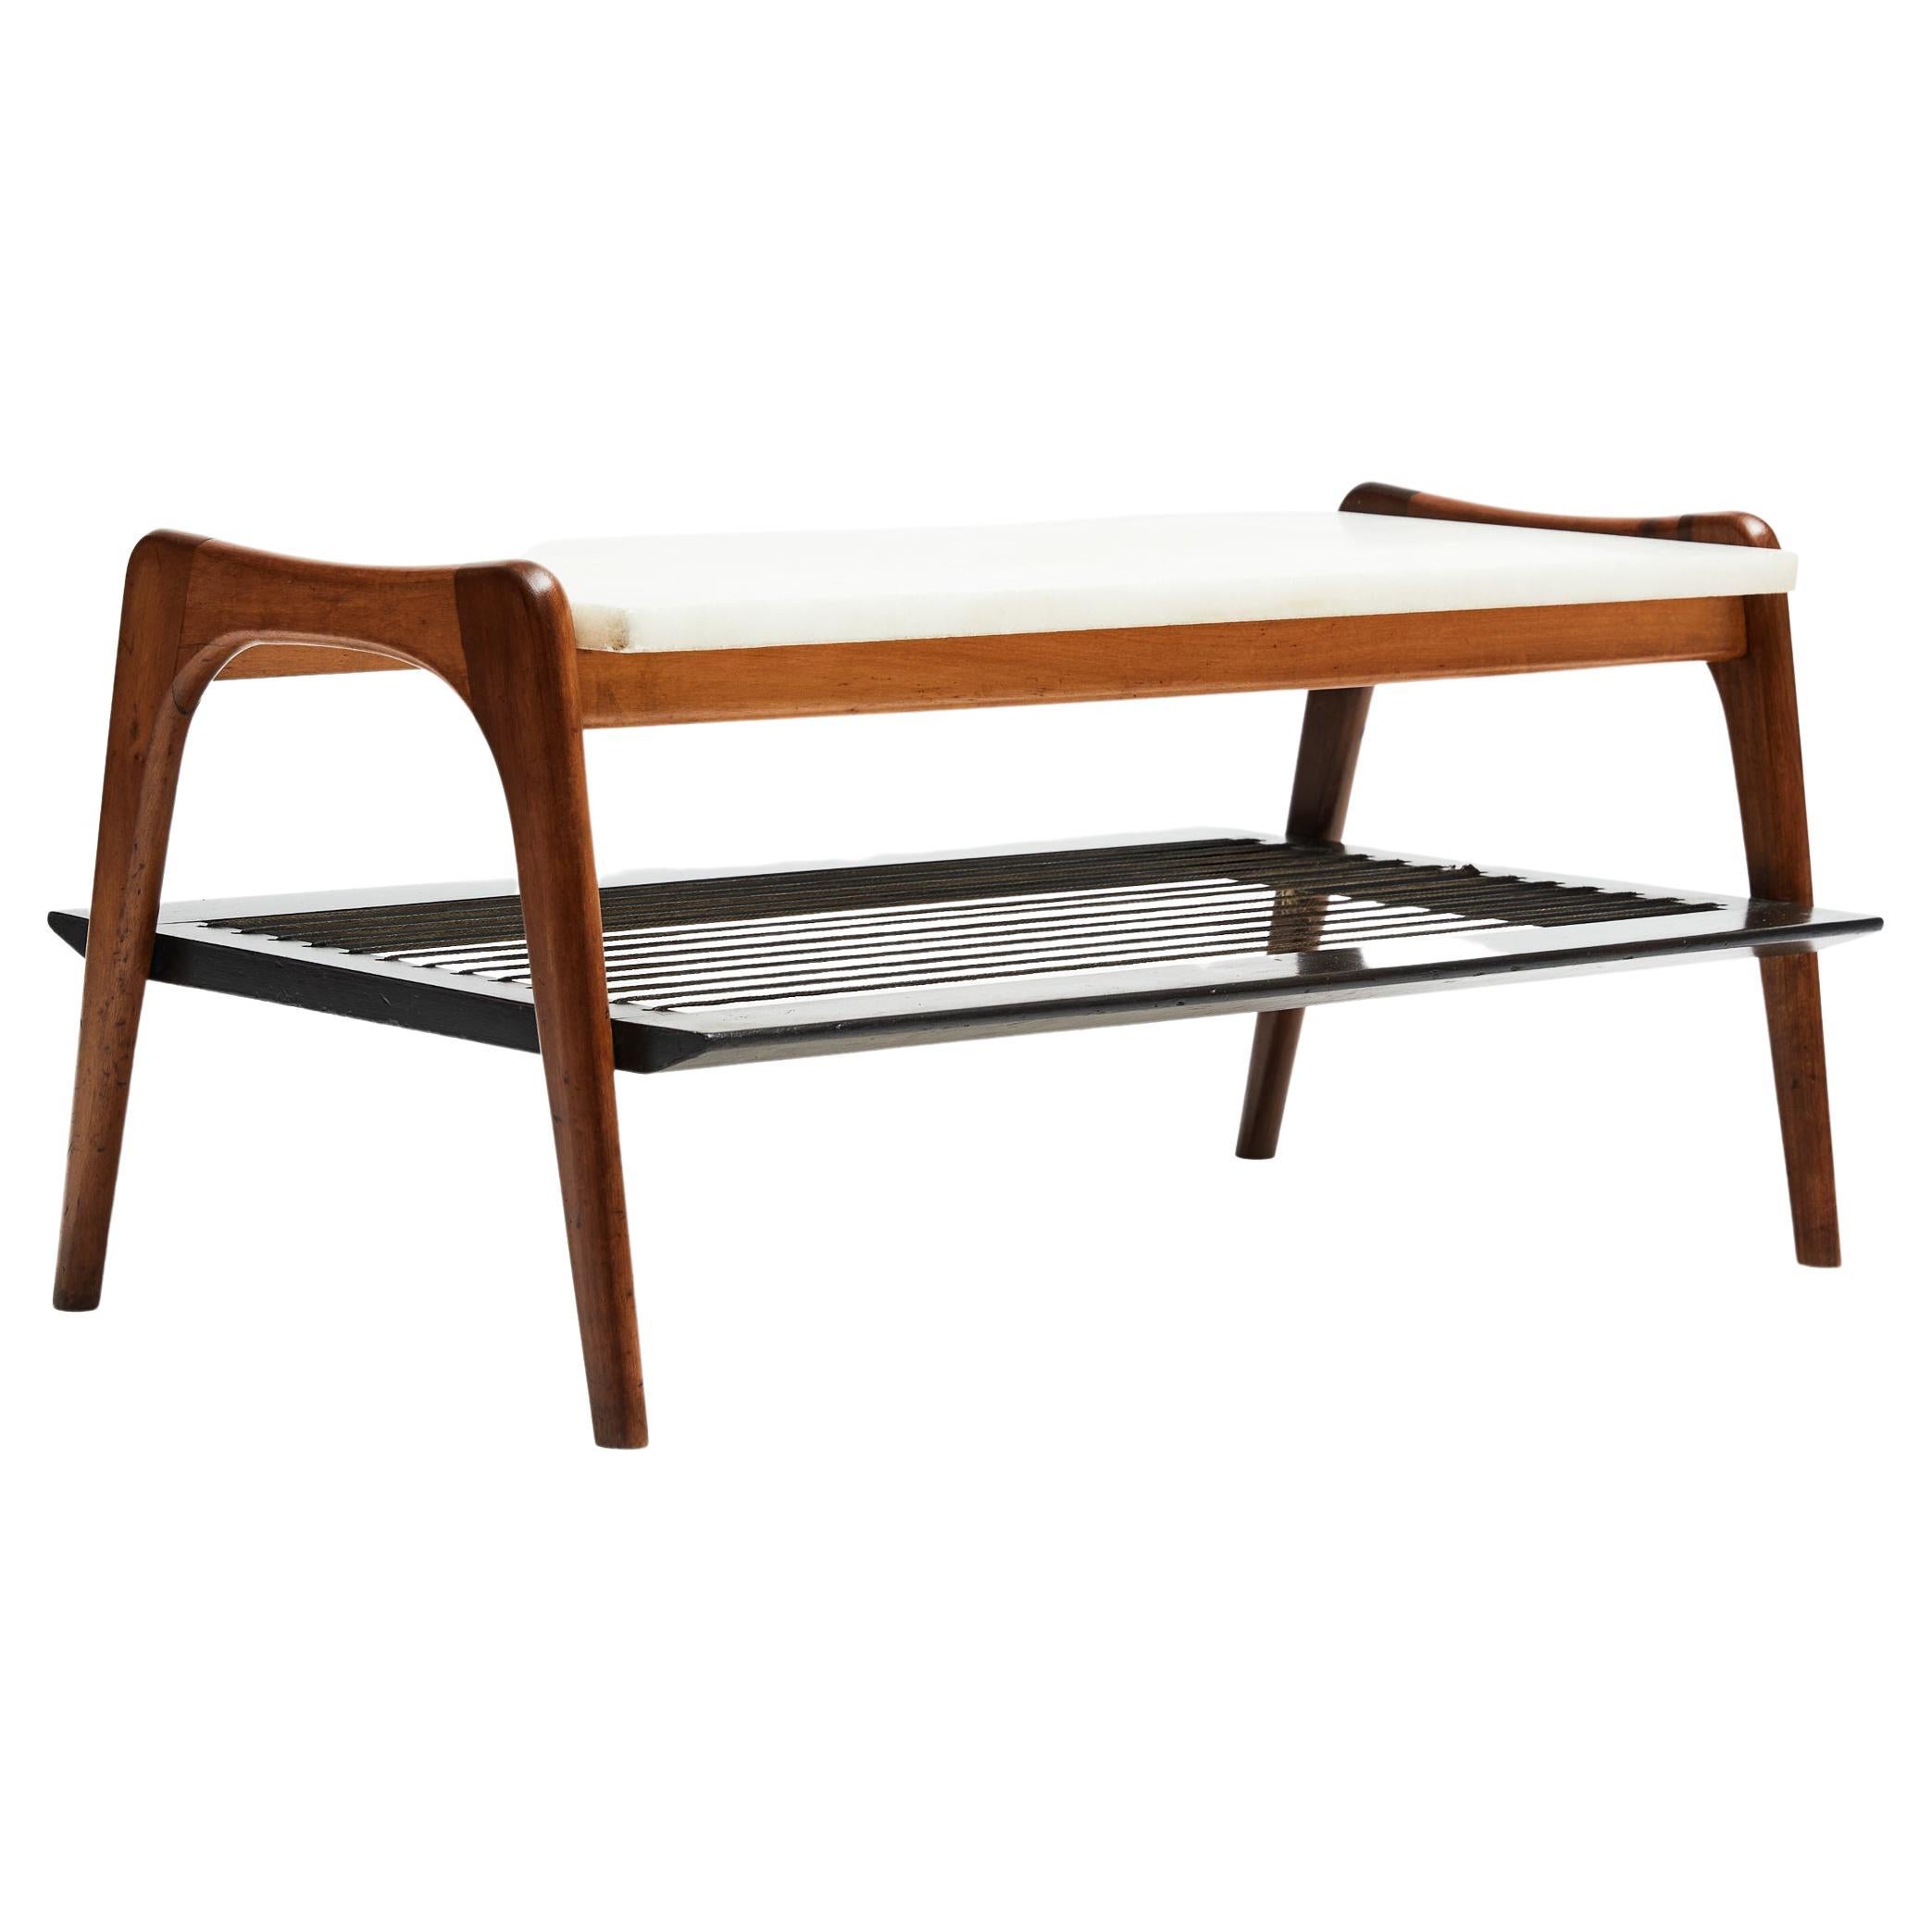 Brazilian Modern Coffee Table in Hardwood & Marble by Moveis Bergamo, 1950’s For Sale